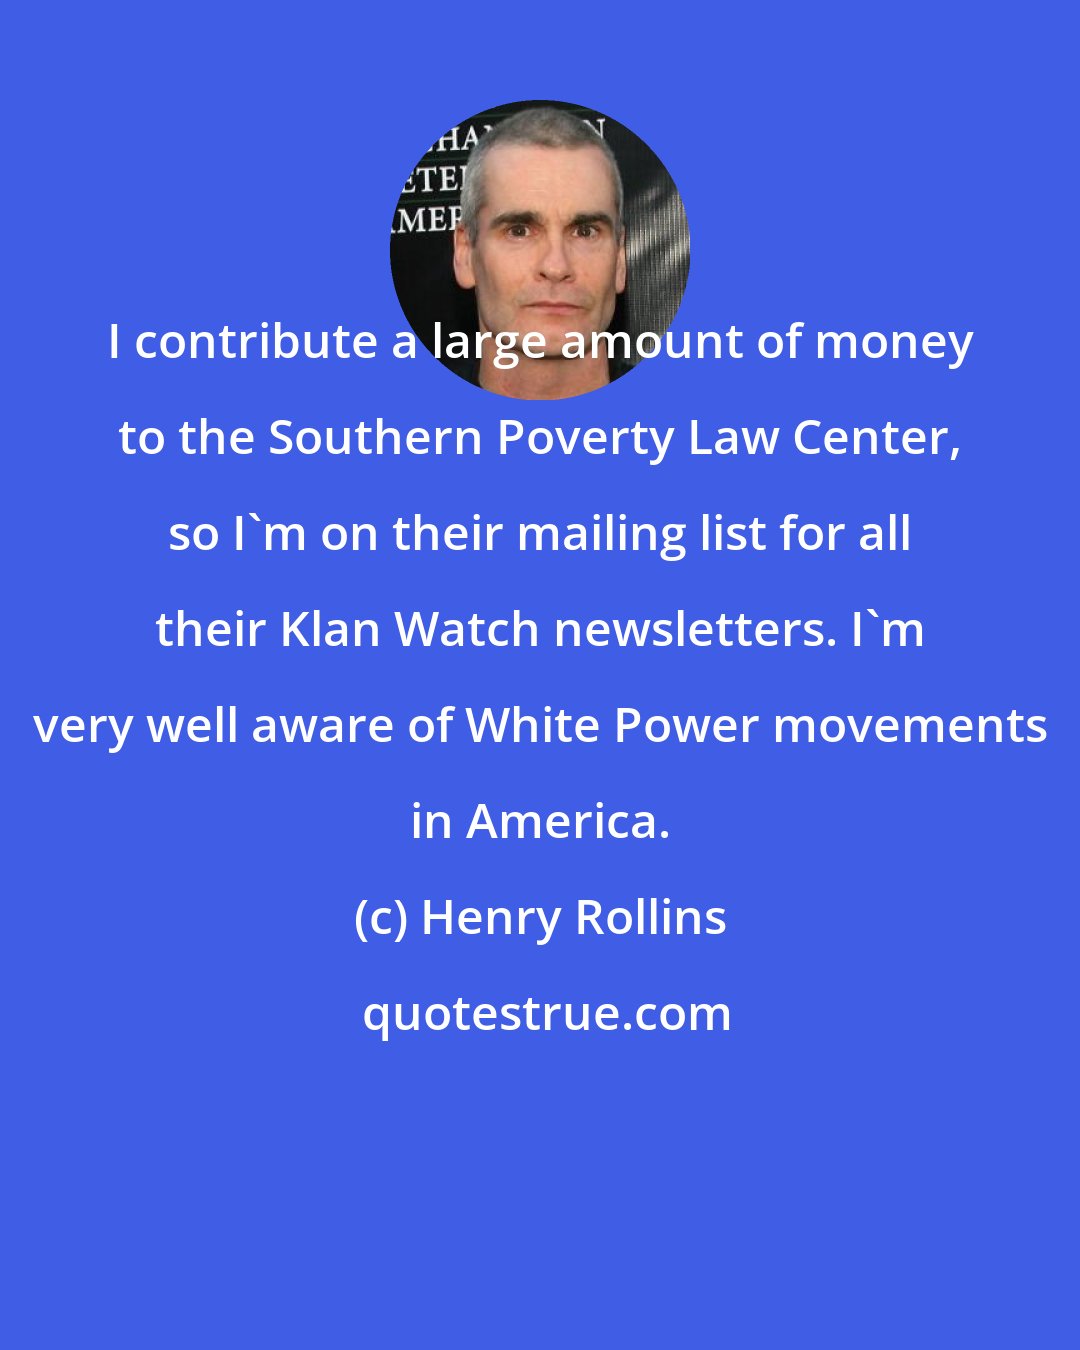 Henry Rollins: I contribute a large amount of money to the Southern Poverty Law Center, so I'm on their mailing list for all their Klan Watch newsletters. I'm very well aware of White Power movements in America.